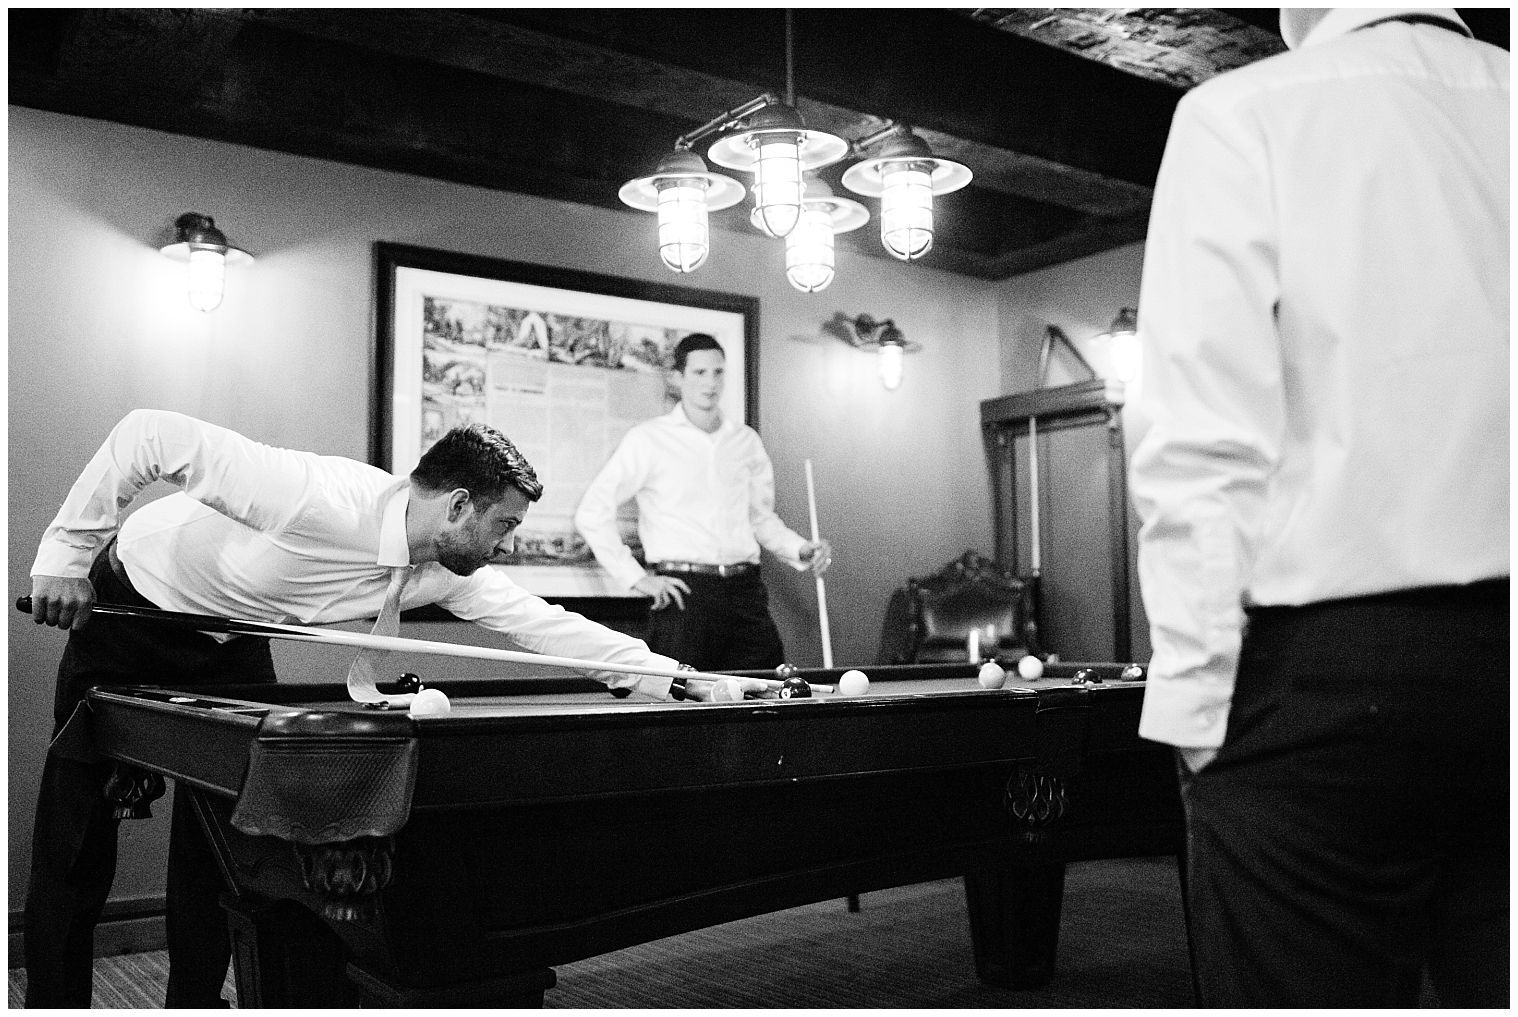 Before his Copper mountain wedding, the groom plays pool with his groomsmen.